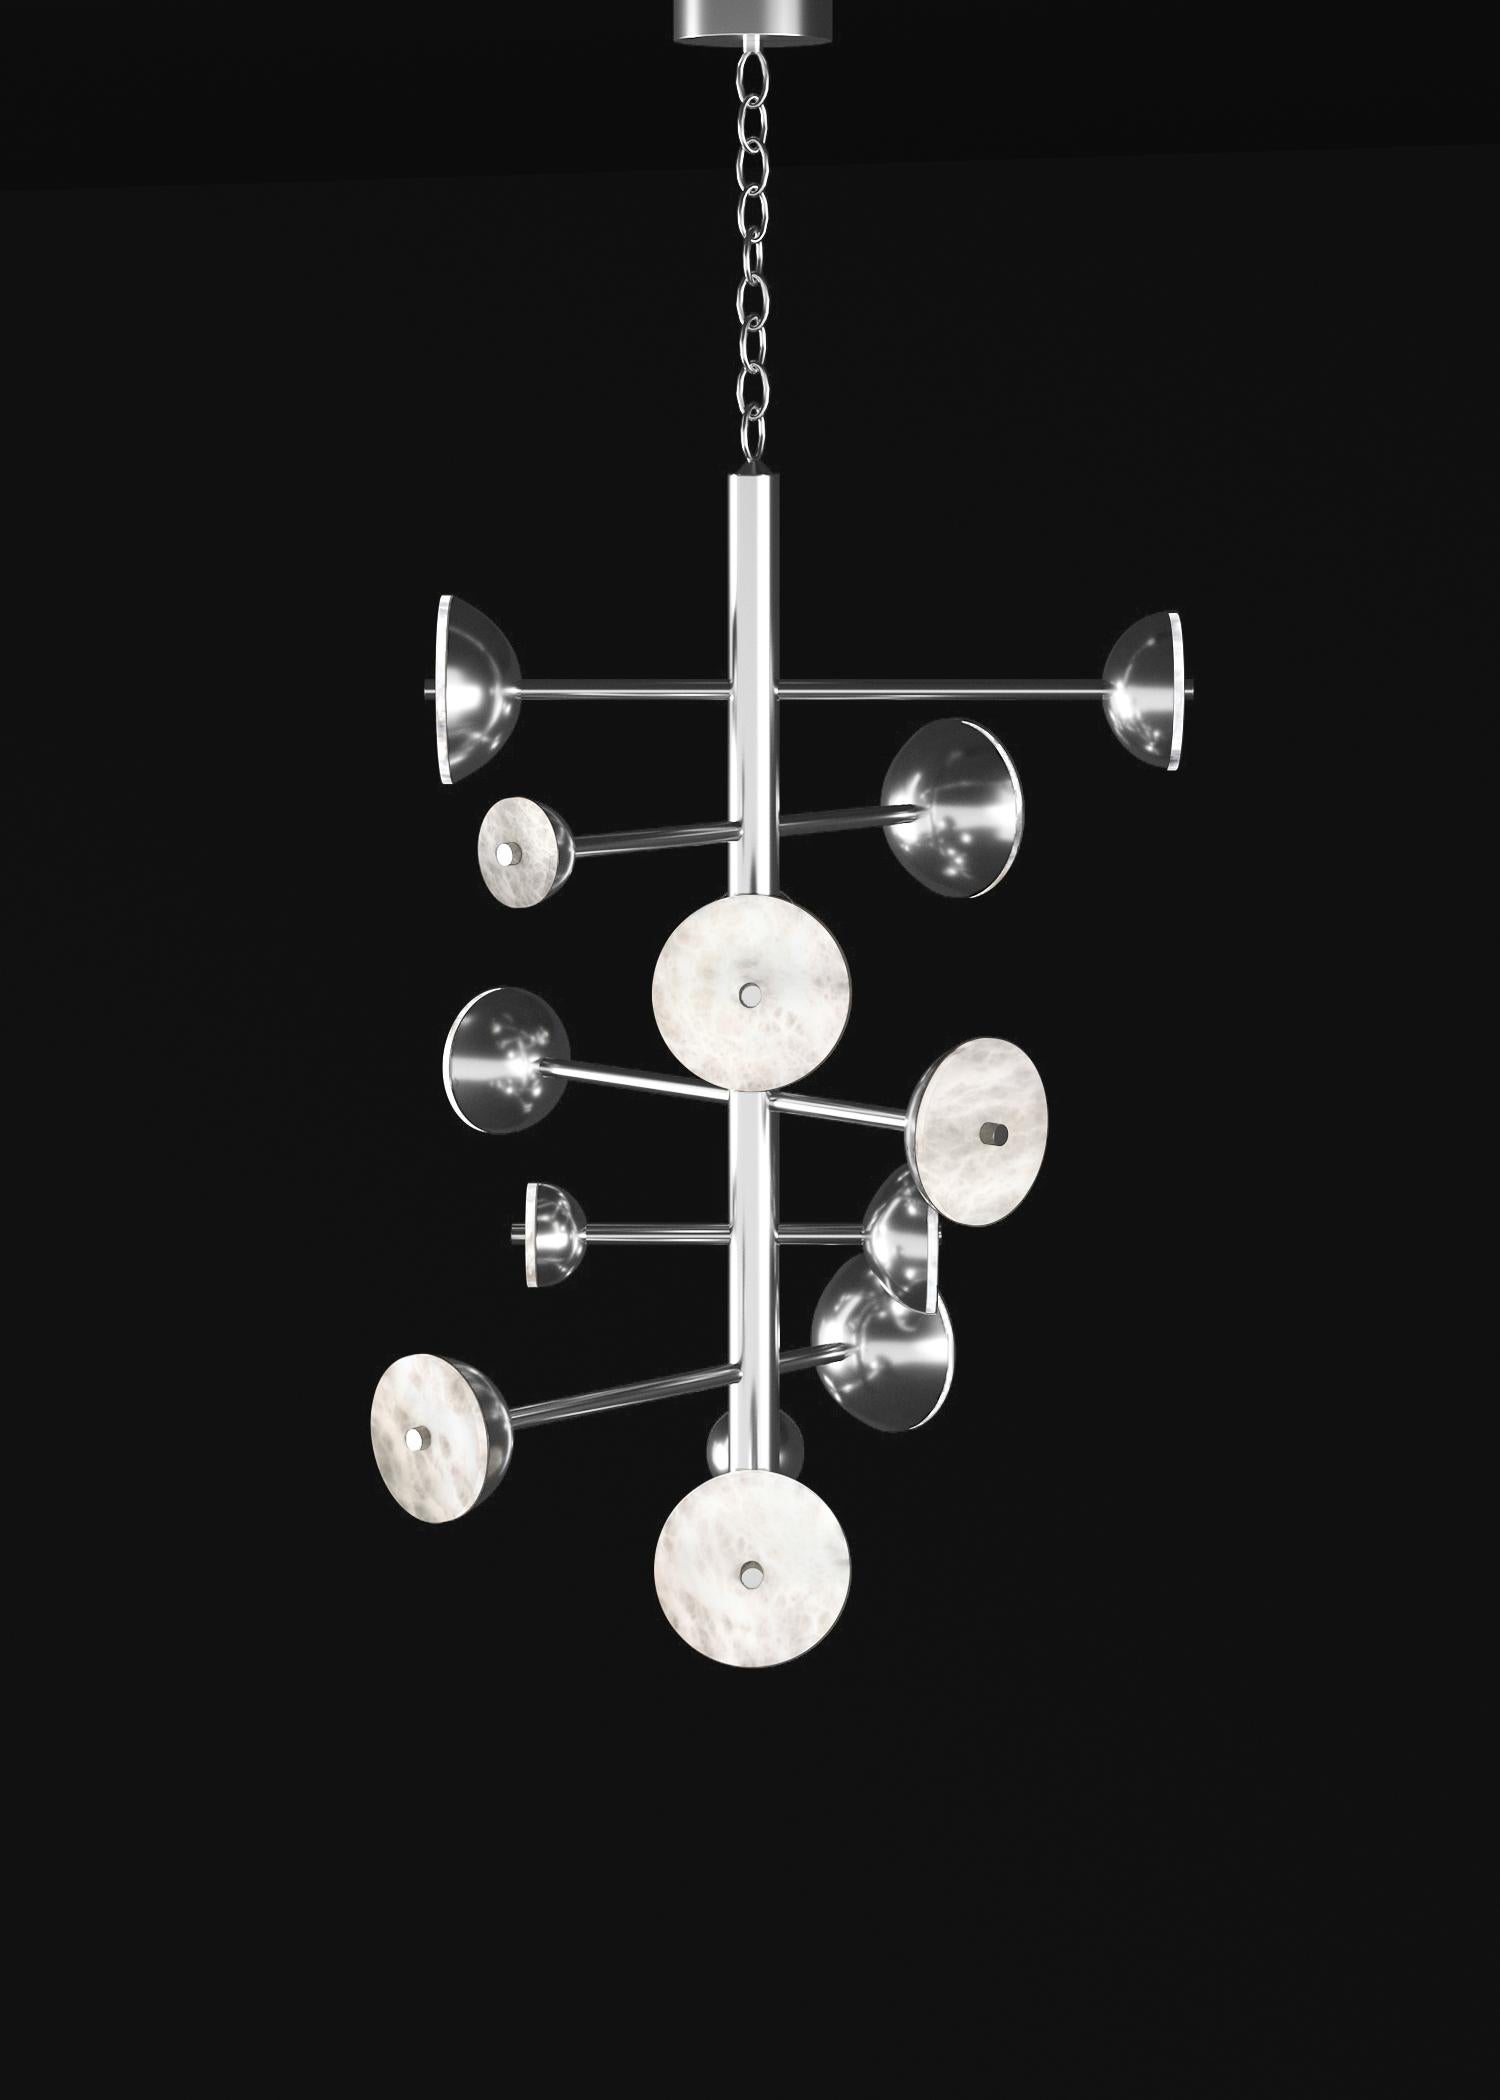 Teti Shiny Silver Metal Chandelier by Alabastro Italiano
Dimensions: D 74,5 x W 77,5 x H 110 cm.
Materials: White alabaster and metal.

Available in different finishes: Shiny Silver, Bronze, Brushed Brass, Ruggine of Florence, Brushed Burnished,